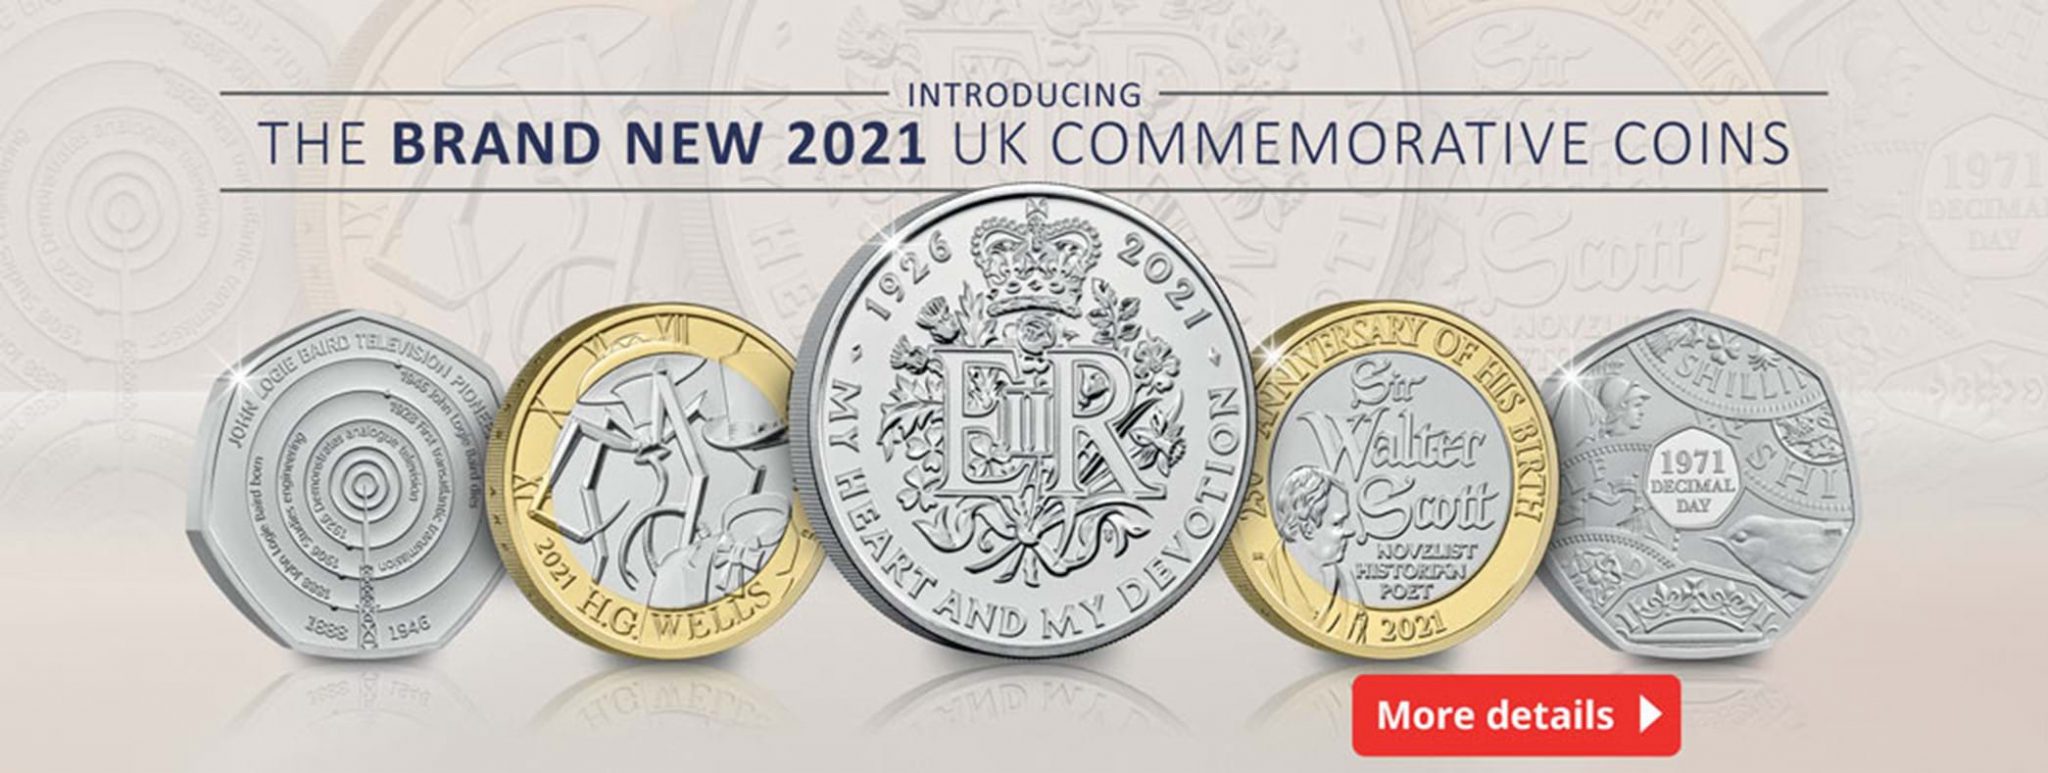 First Look The New Royal Mint coins for 2021 The Westminster Collection